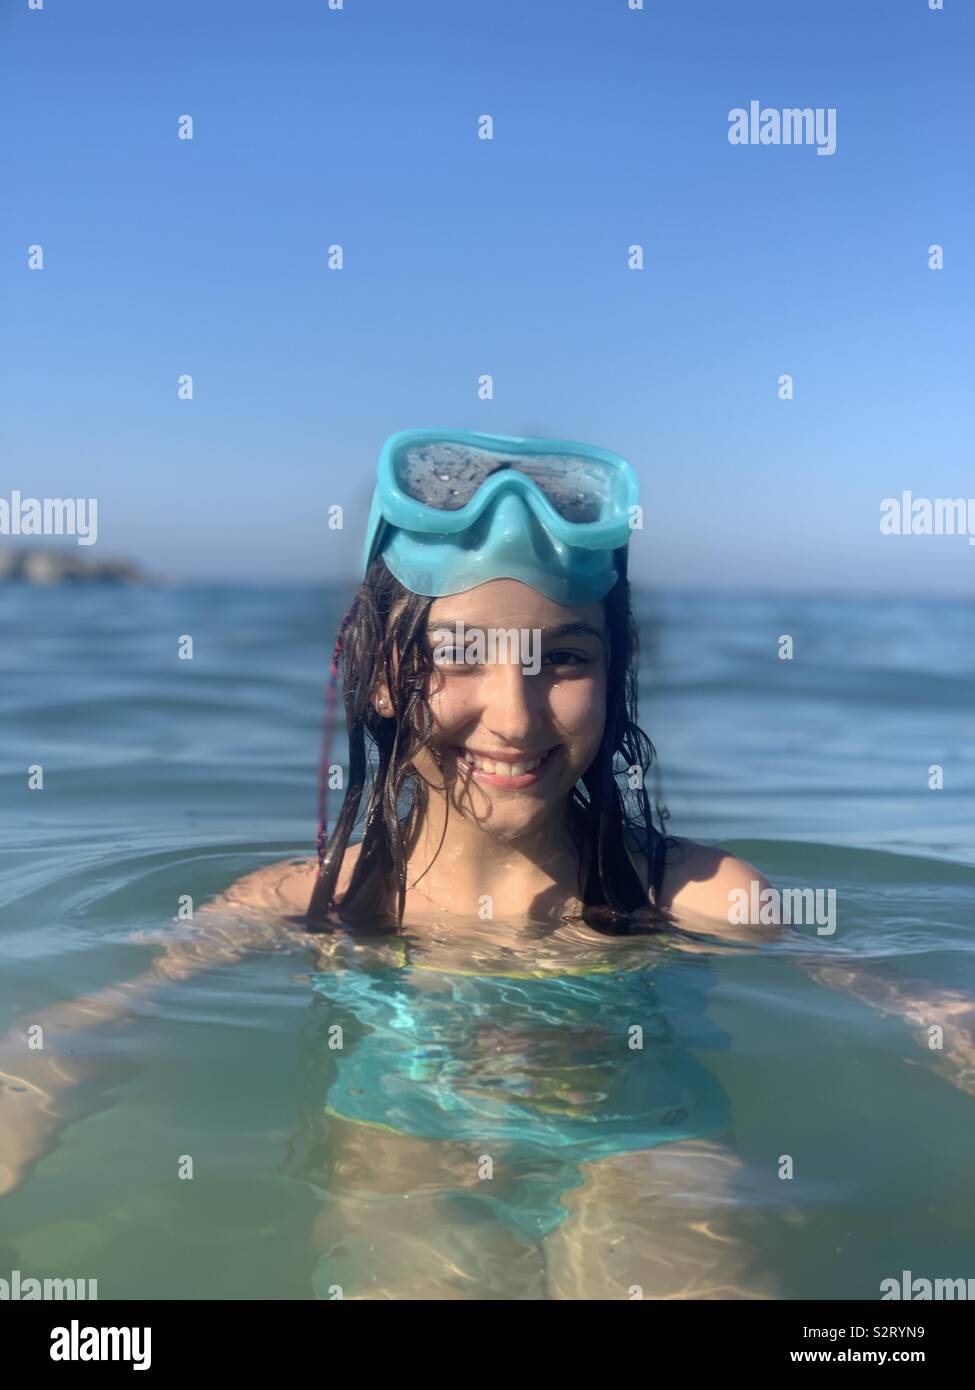 Ten years old girl portrait in the sea Stock Photo